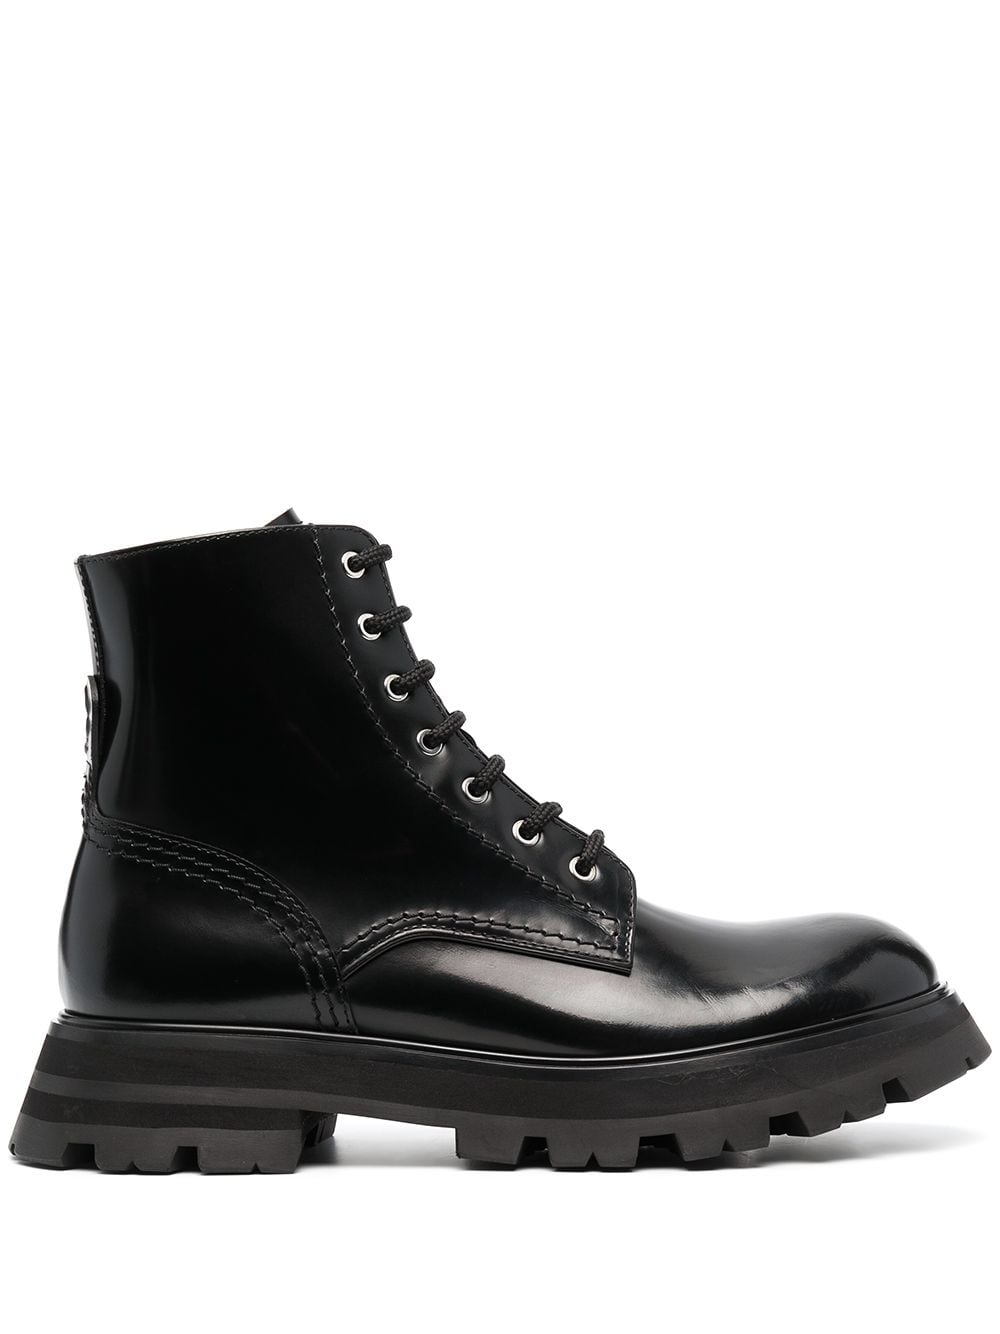 Wander Leather Boots дамски обувки Alexander Mcqueen 840470222_36